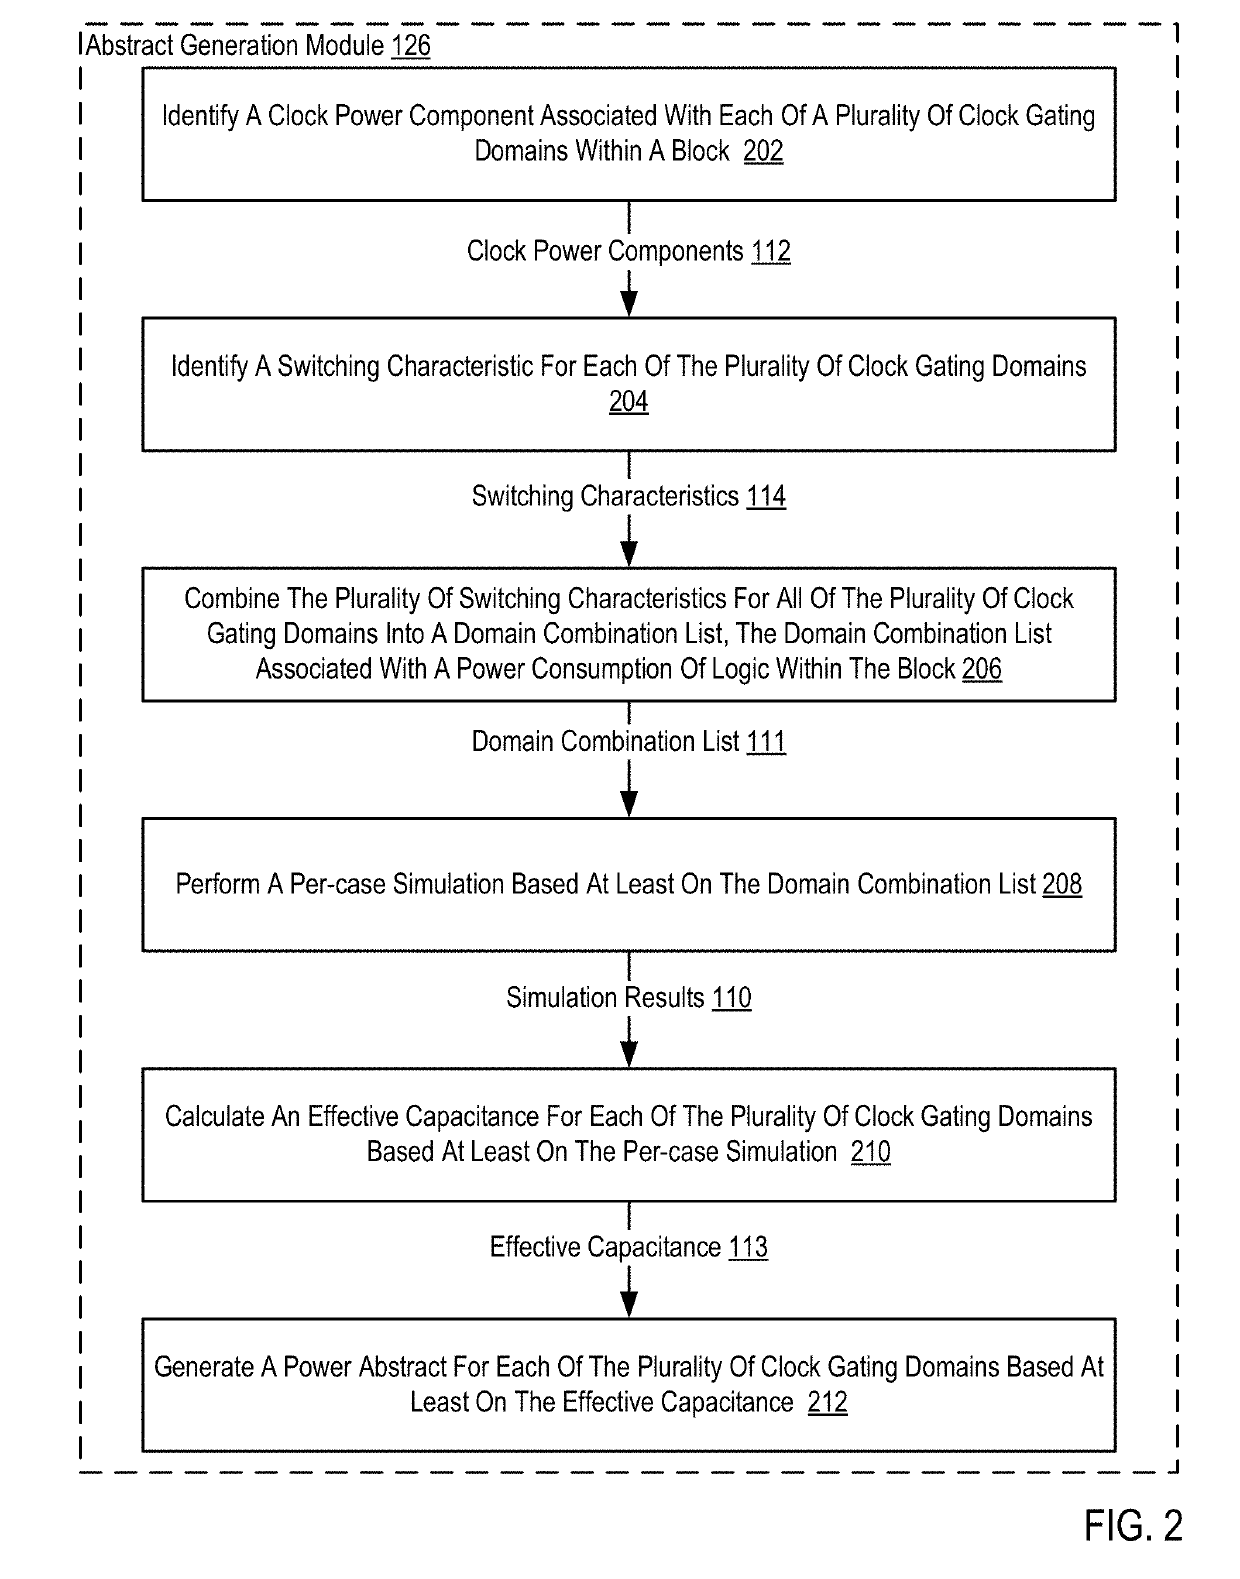 Methods for generating a contributor-based power abstract for a device